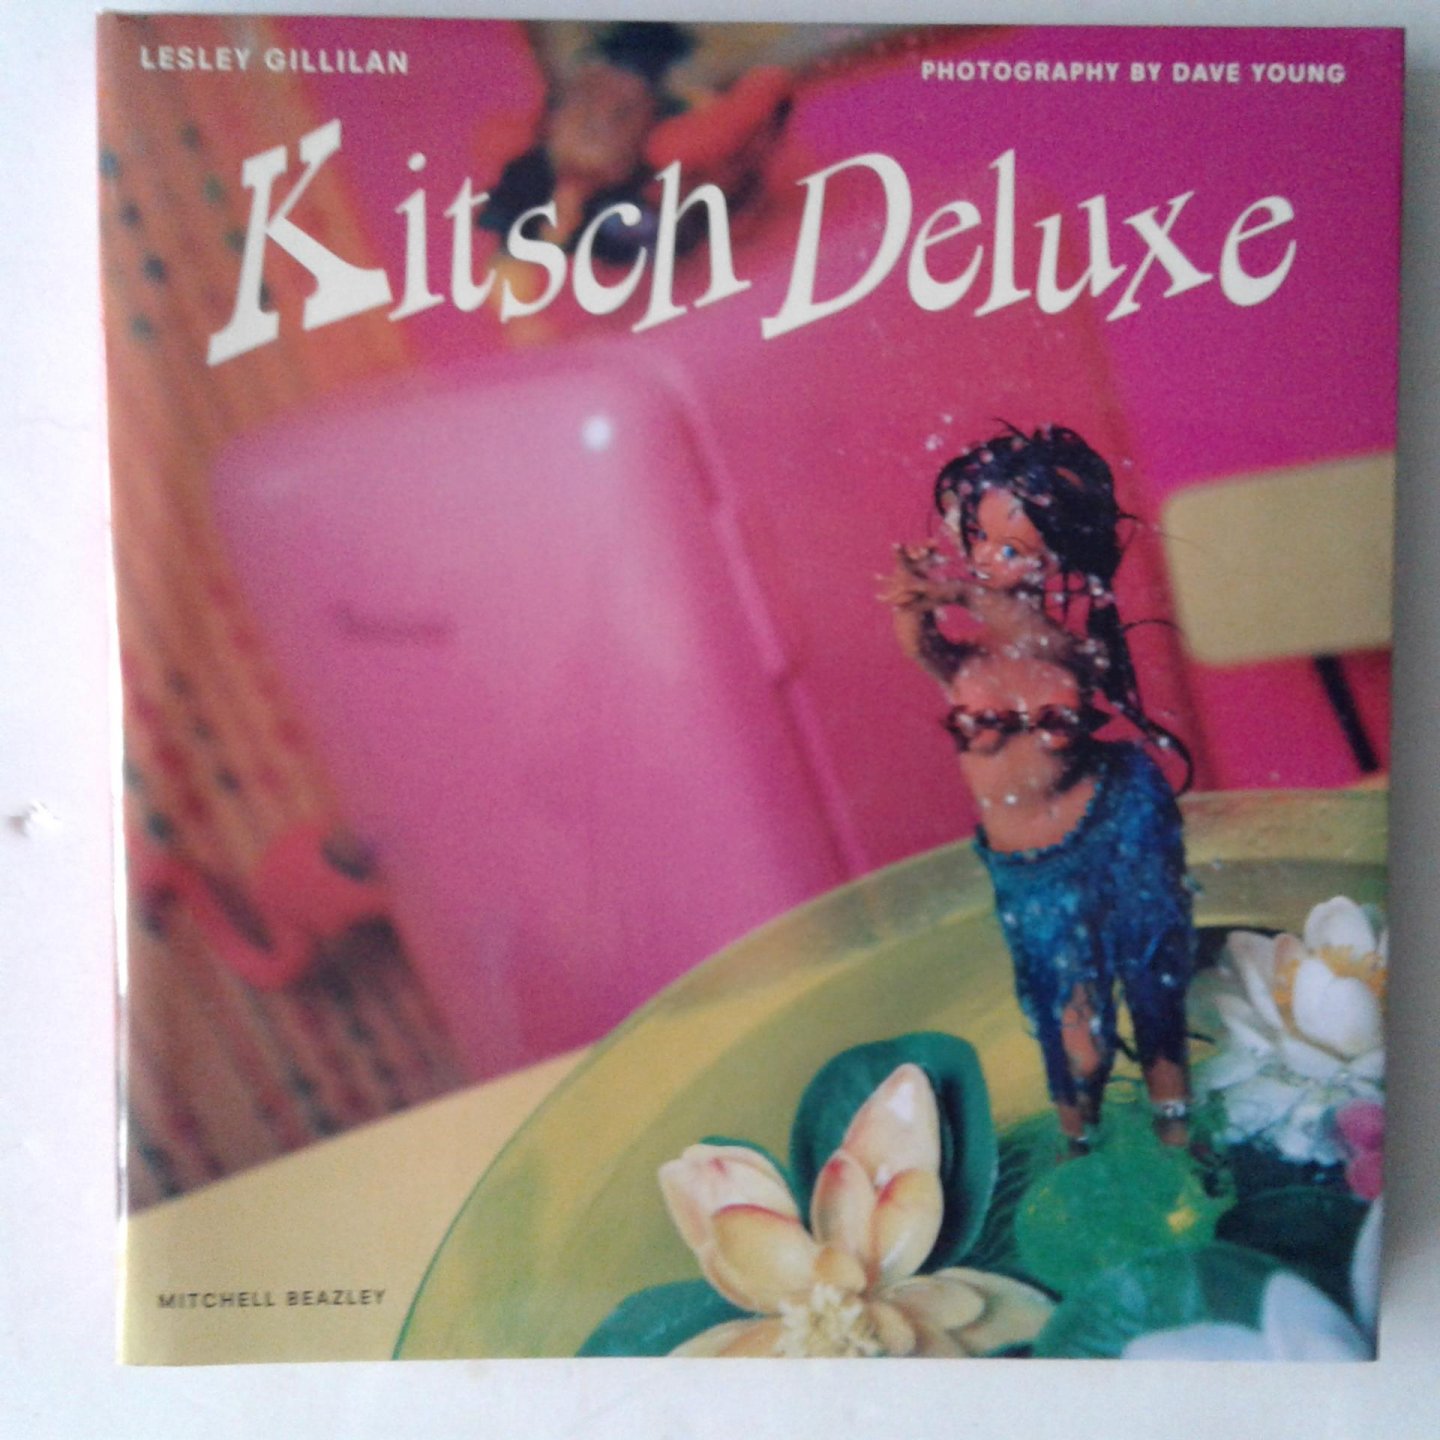 Gillilan, Lesley ; Young, Dave (photographs) - Kitsch Deluxe